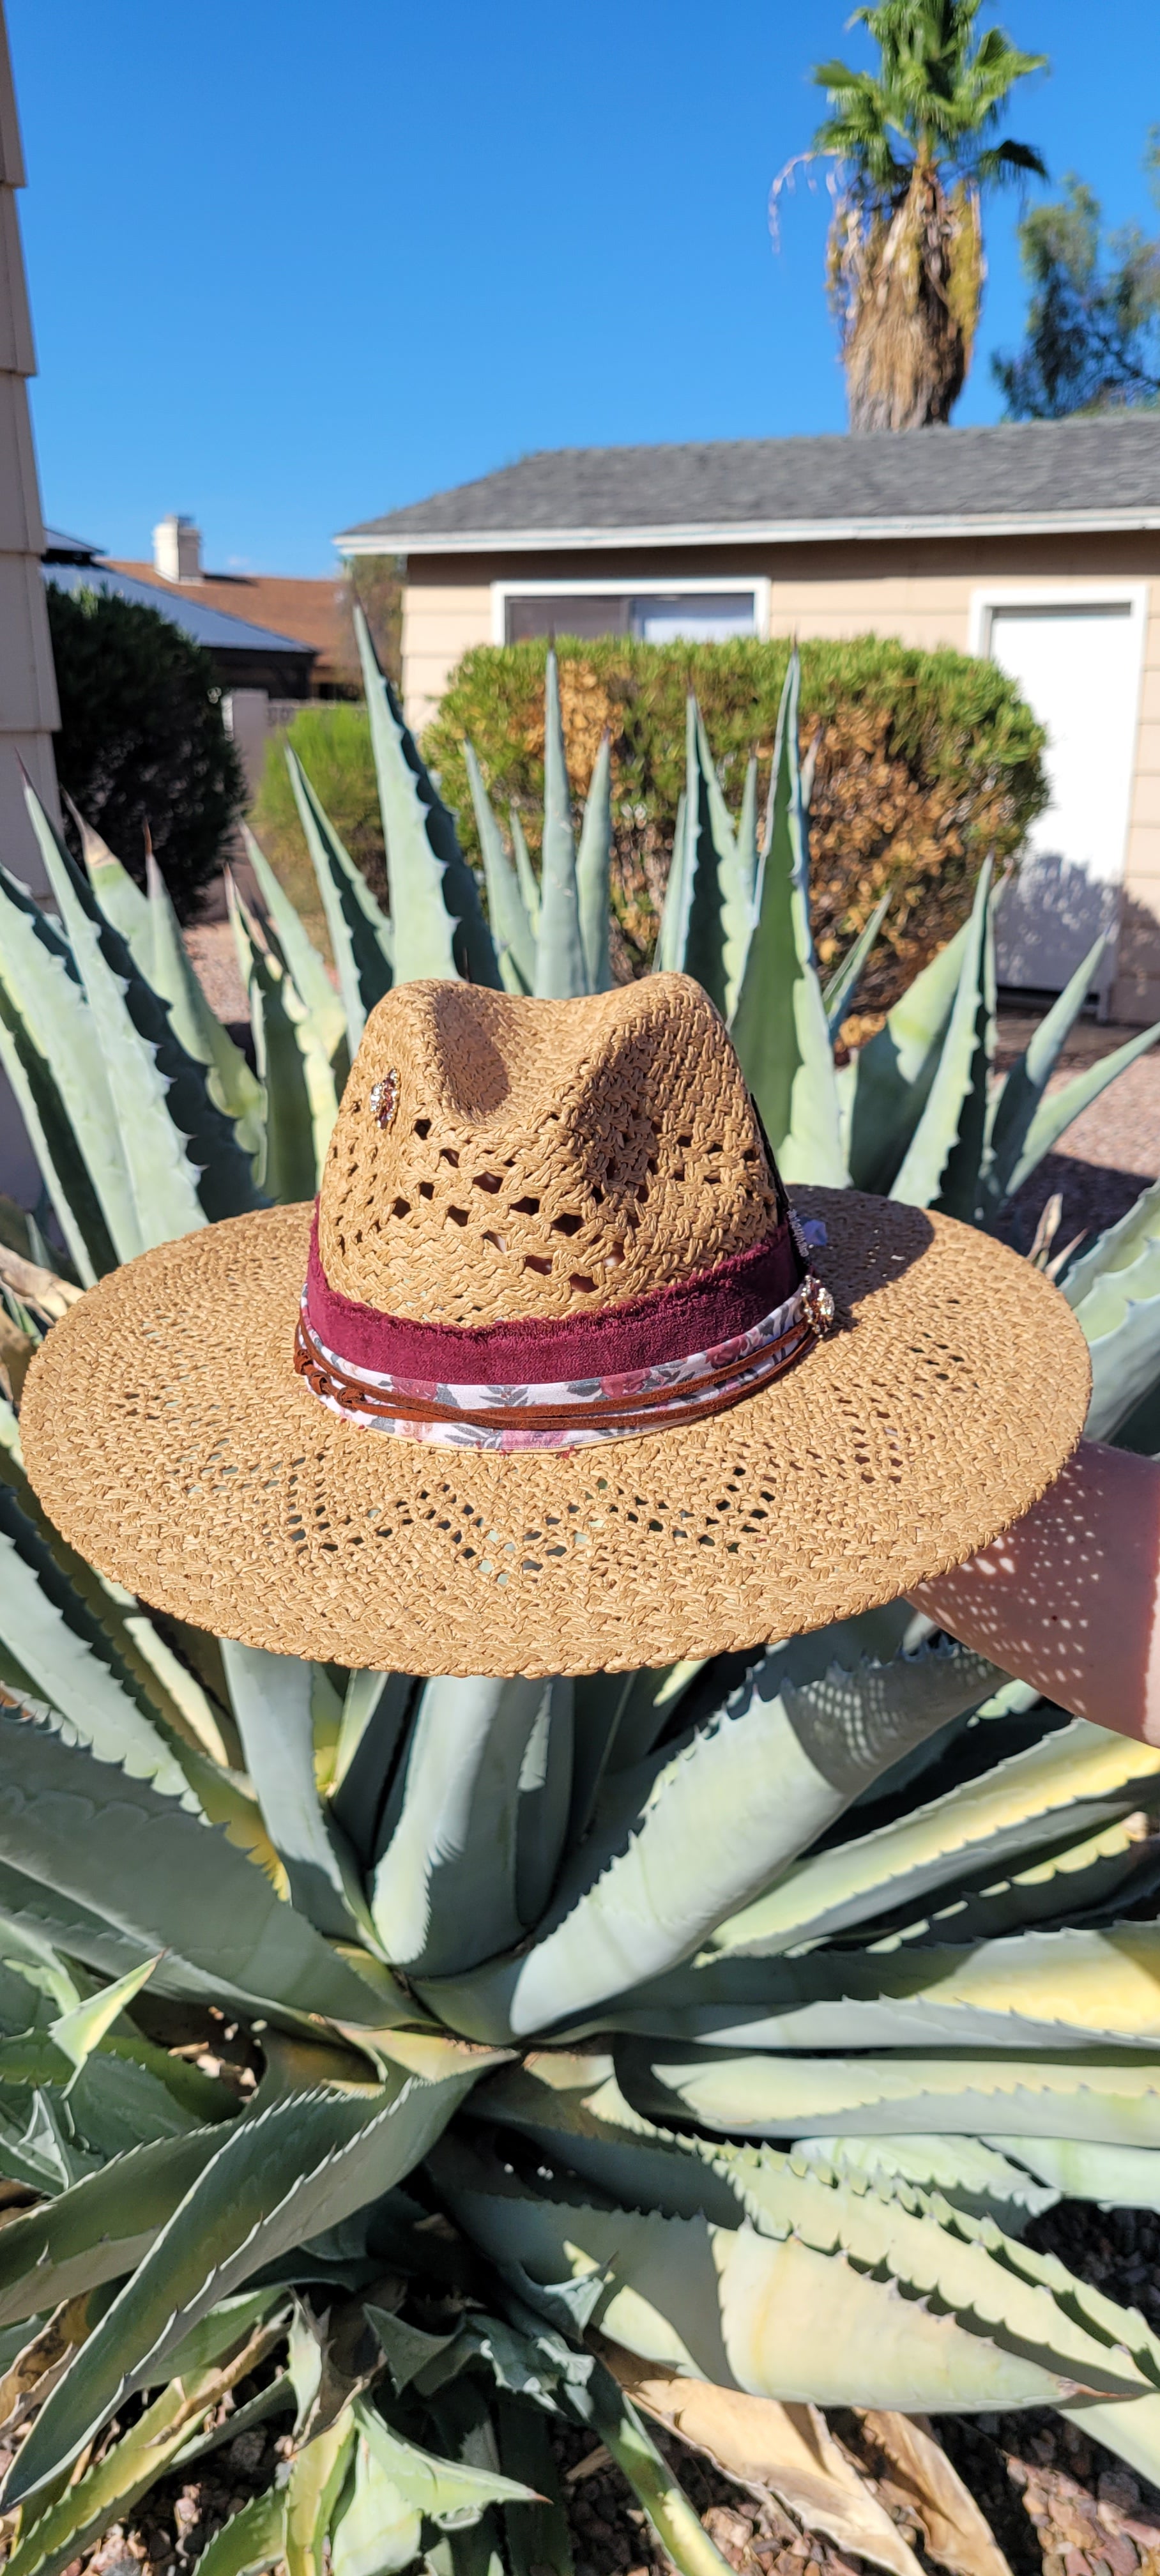 Features frayed velvet ribbon, sheer floral ribbon, suede band, saguaro cactus & flower brooches Straw hat Flat brim 65% polyester and 35% cotton Ribbon drawstring for hat size adjustment Head Circumference: 24" Crown Height: 5" Brim Length: 15.75" Brim Width: 14.75" Branded & numbered inside crown Custom designed by Kayla